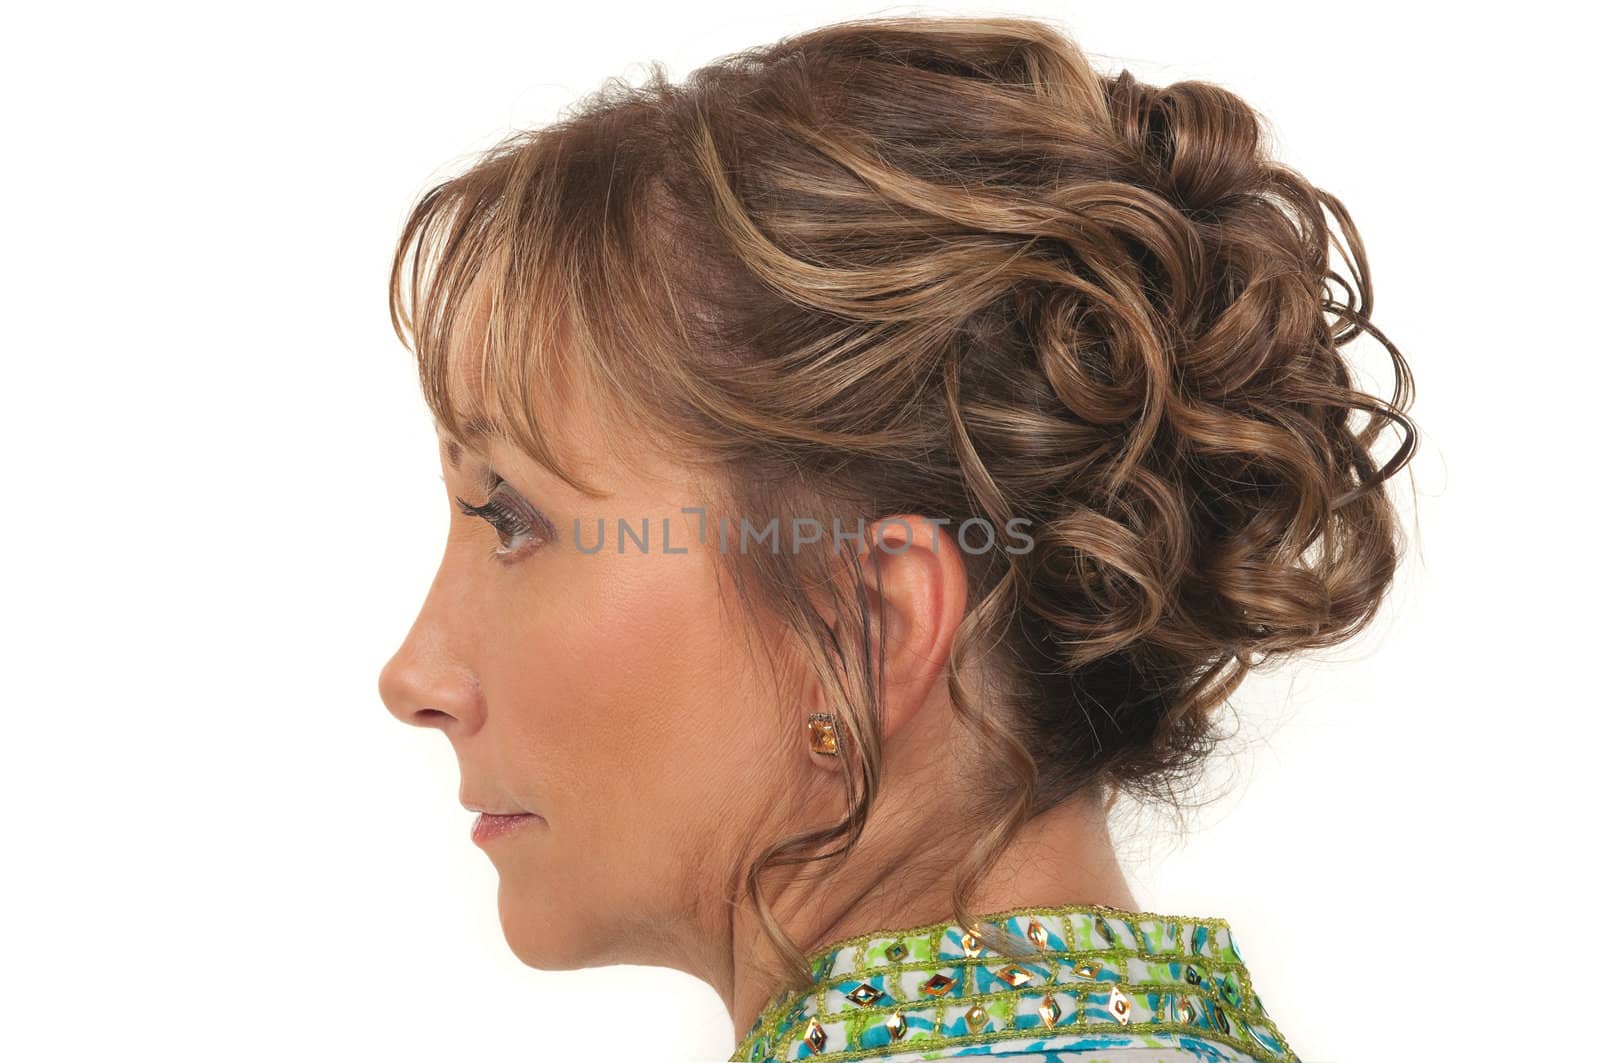 Beautiful hairstyle for a party or wedding for older women